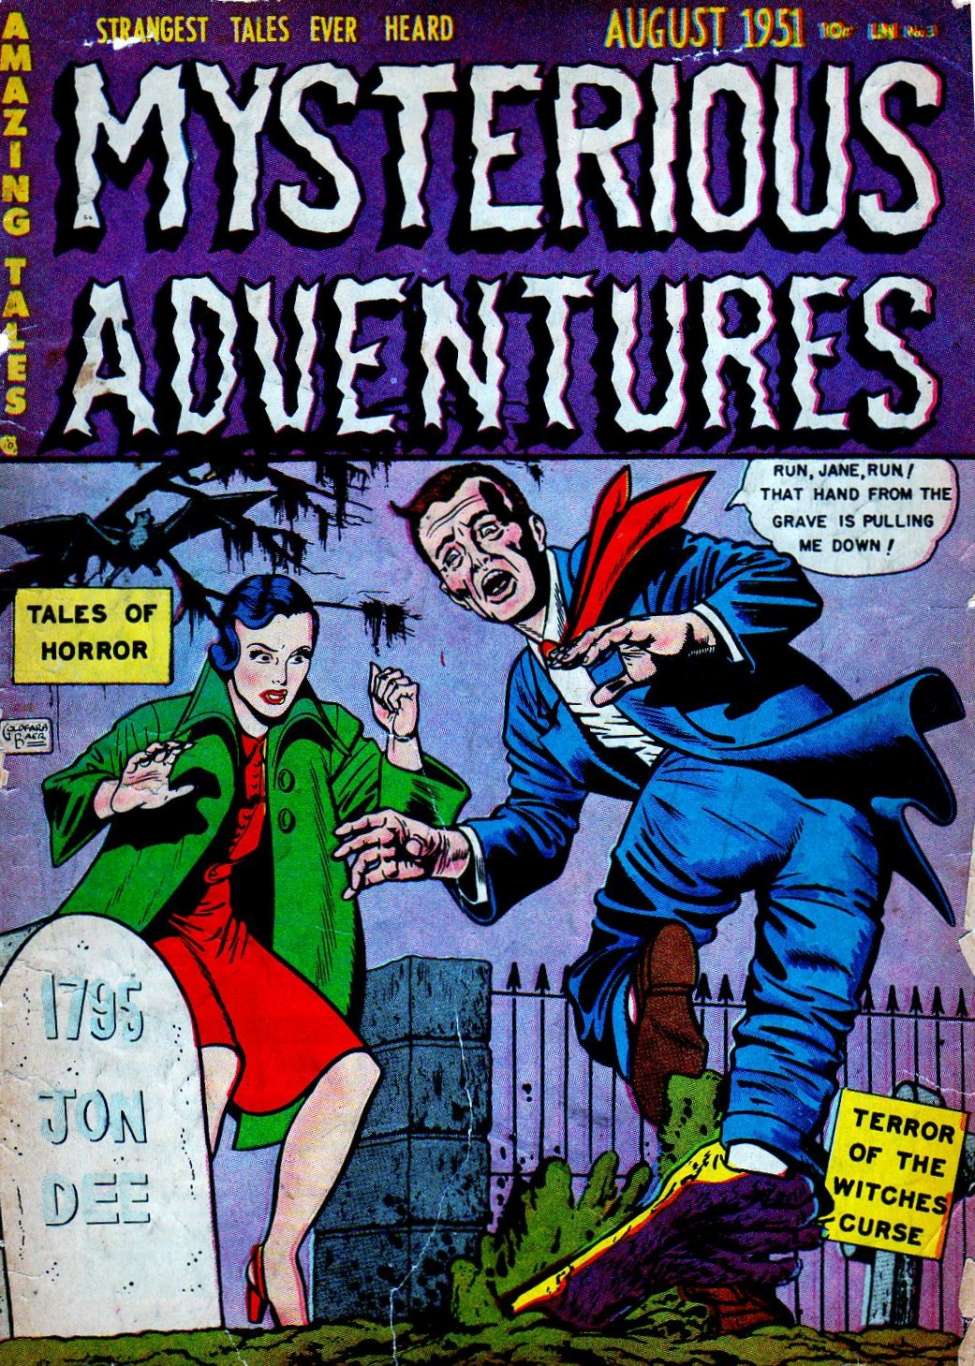 Book Cover For Mysterious Adventures 3 - Version 1